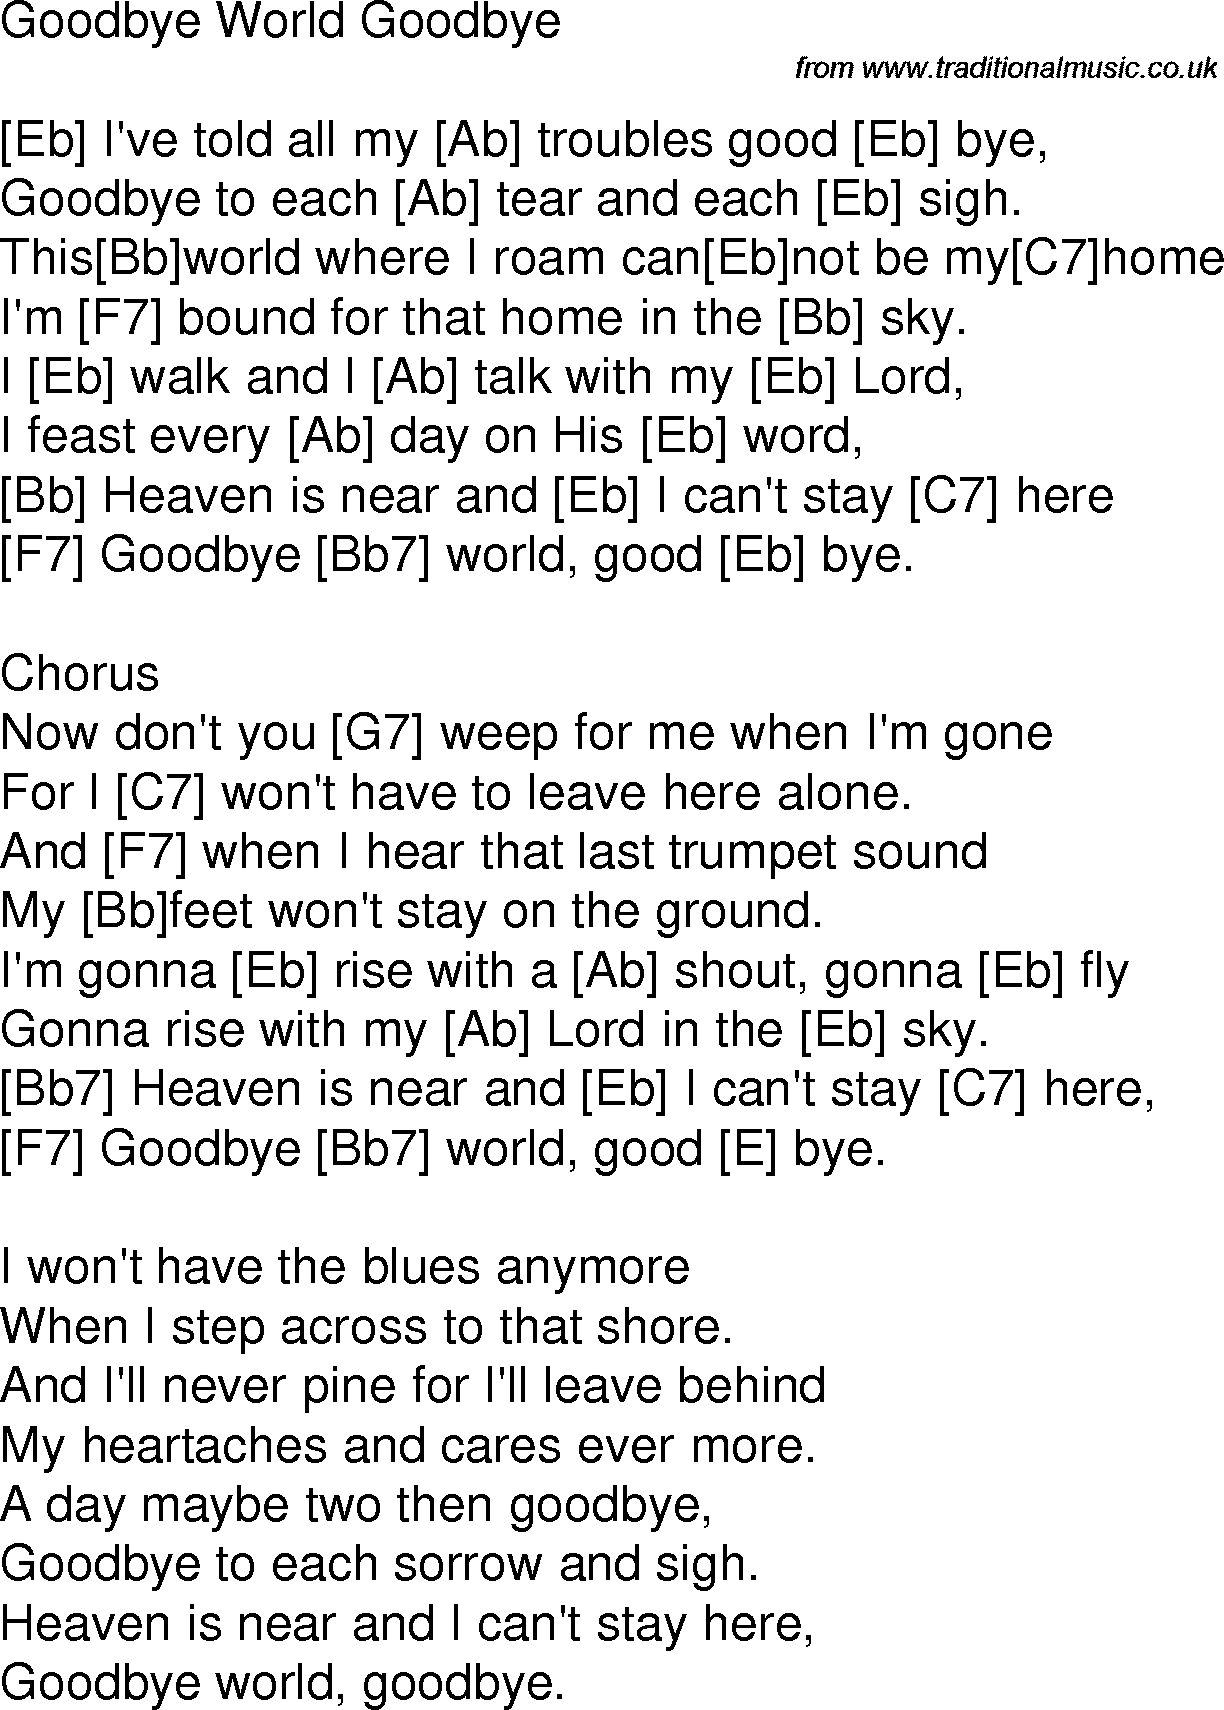 Old time song lyrics with chords for Goodbye World Goodbye Eb